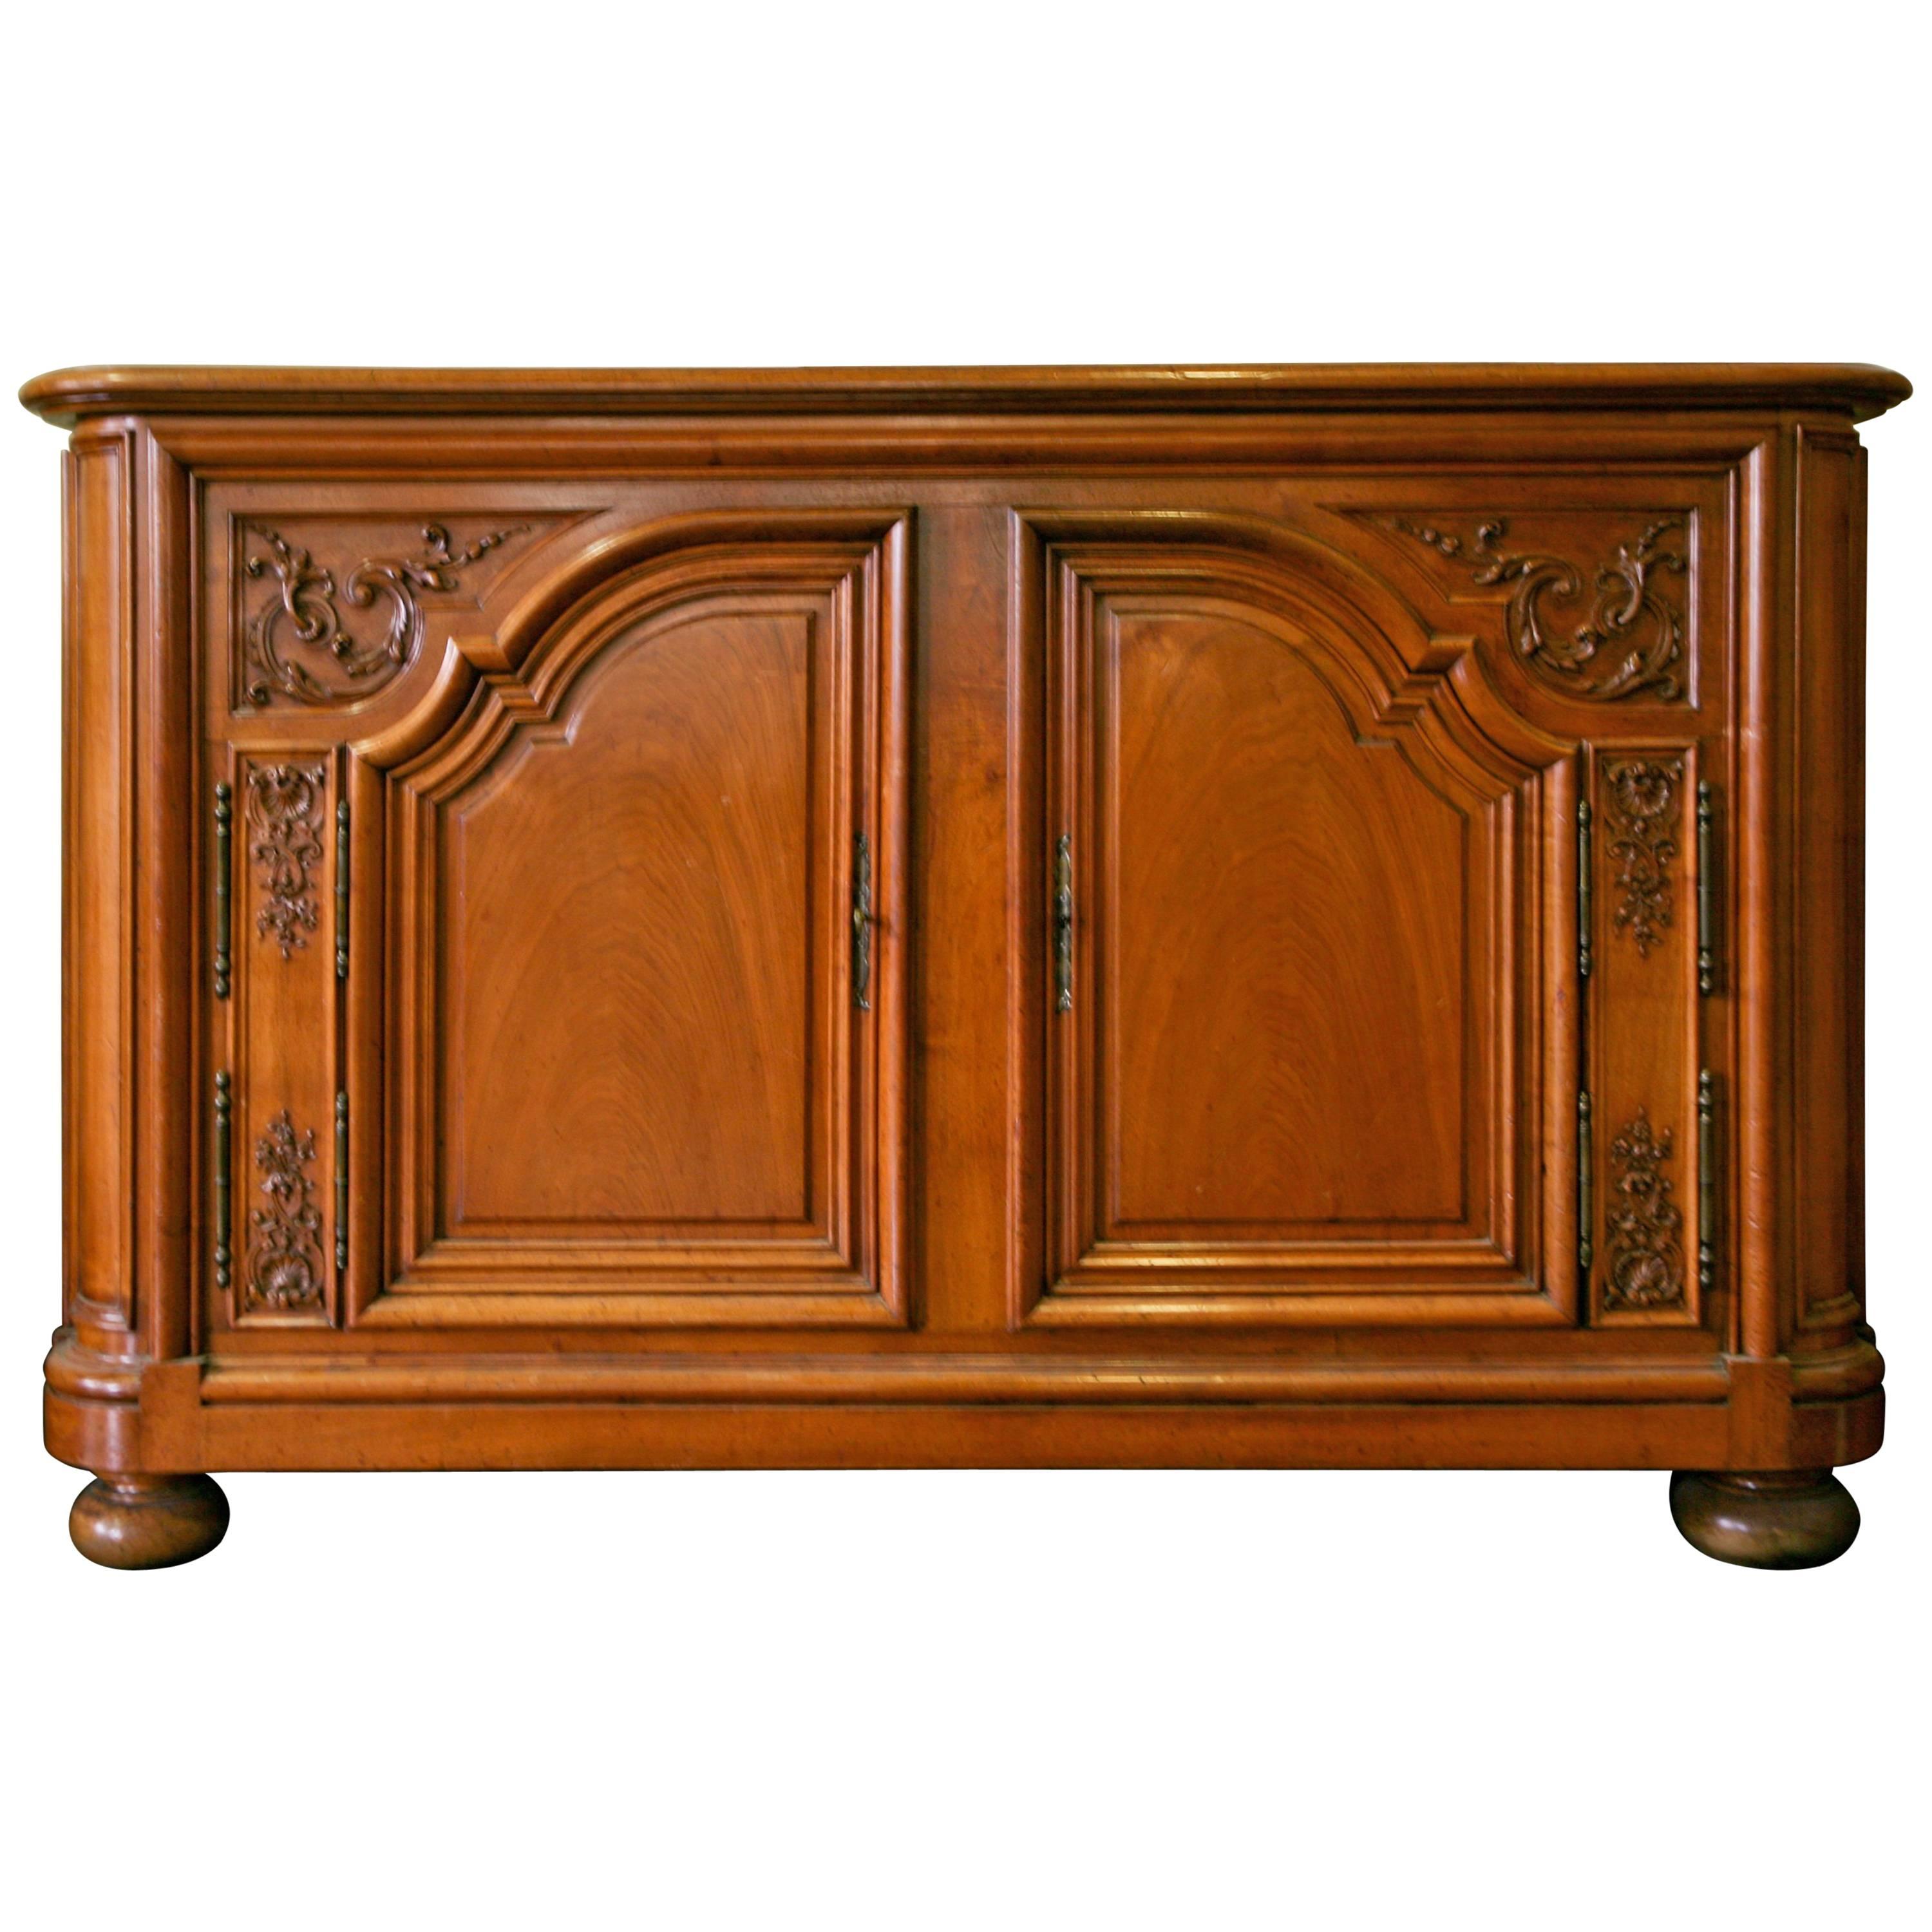 19th Century French Provincial Hand-Carved Walnut Sideboard